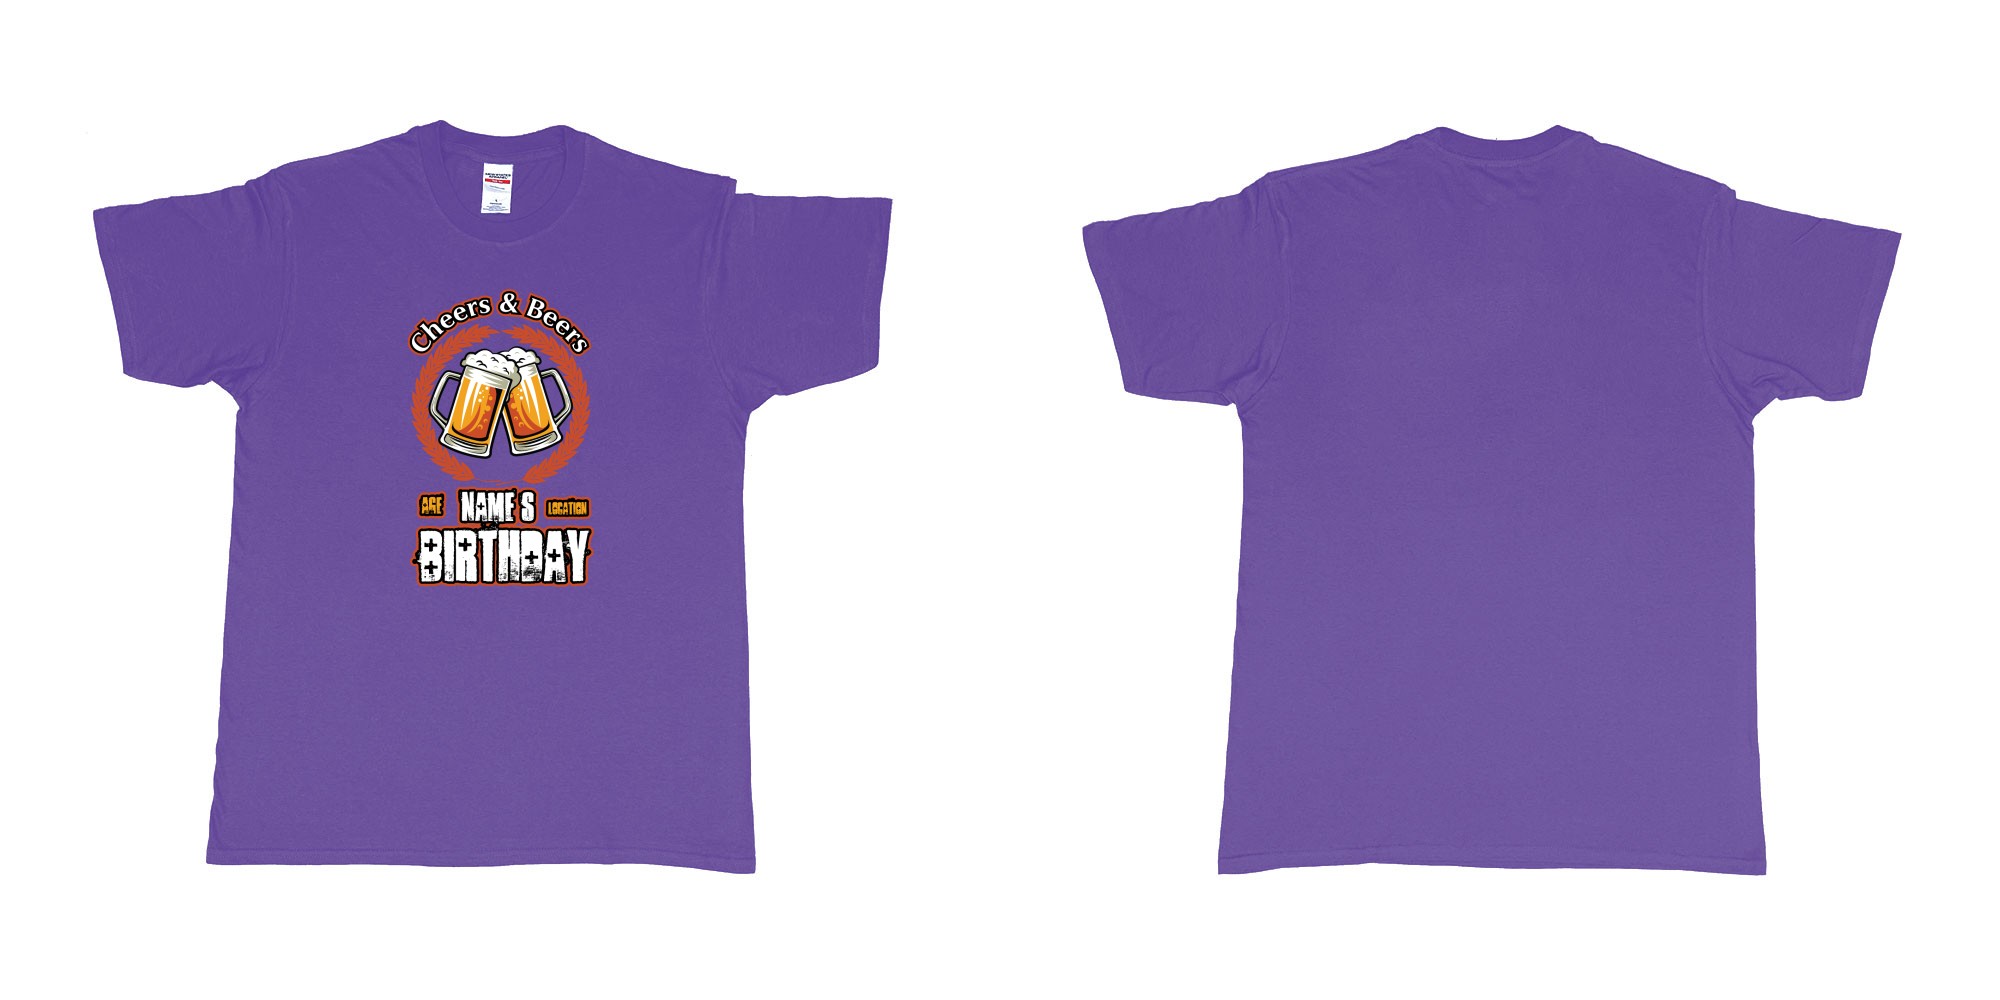 Custom tshirt design cheers and beers birthday in fabric color purple choice your own text made in Bali by The Pirate Way